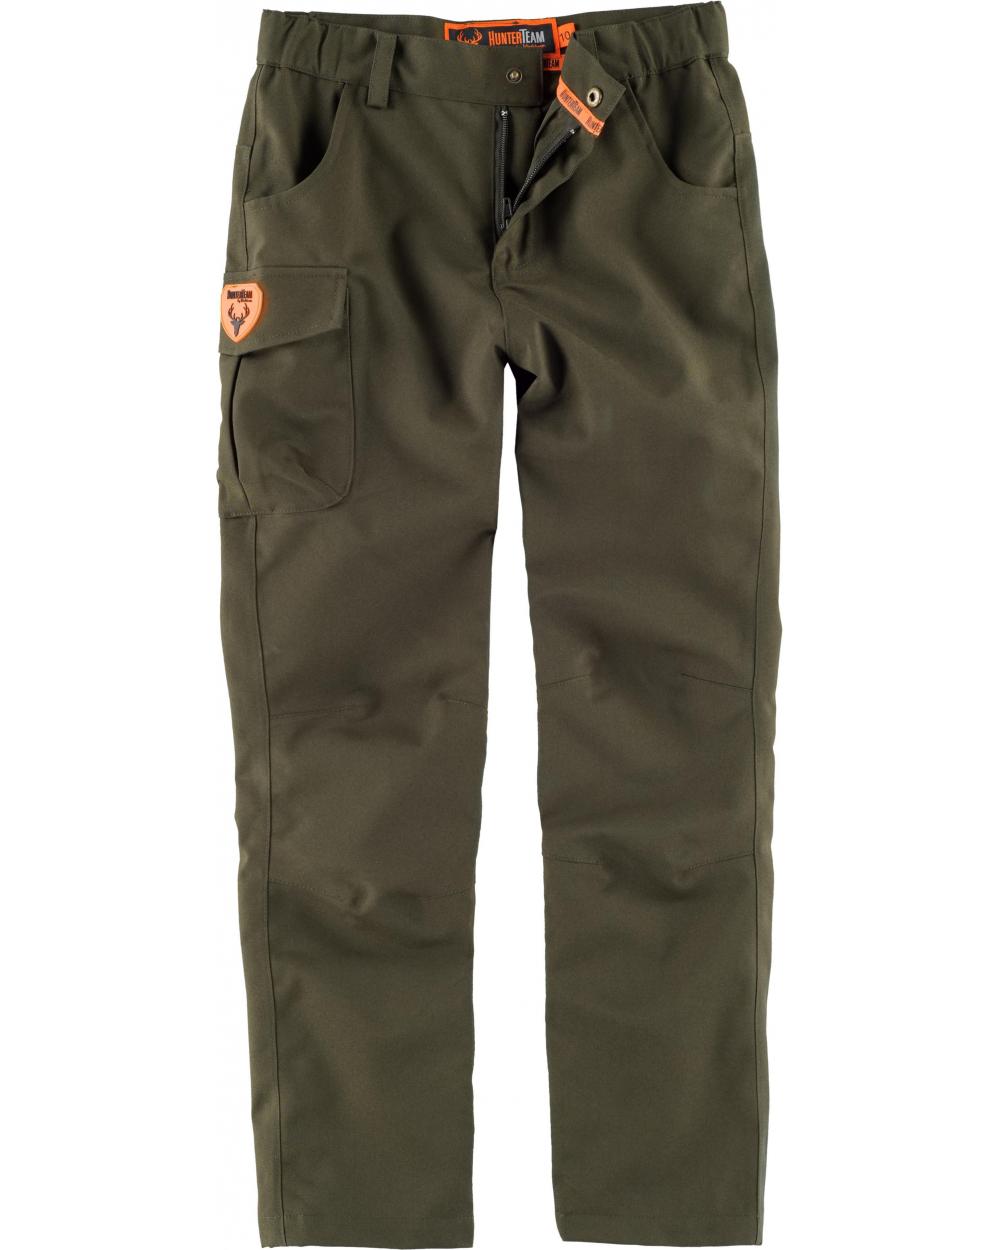 Impermeable infantil – Productos chinos